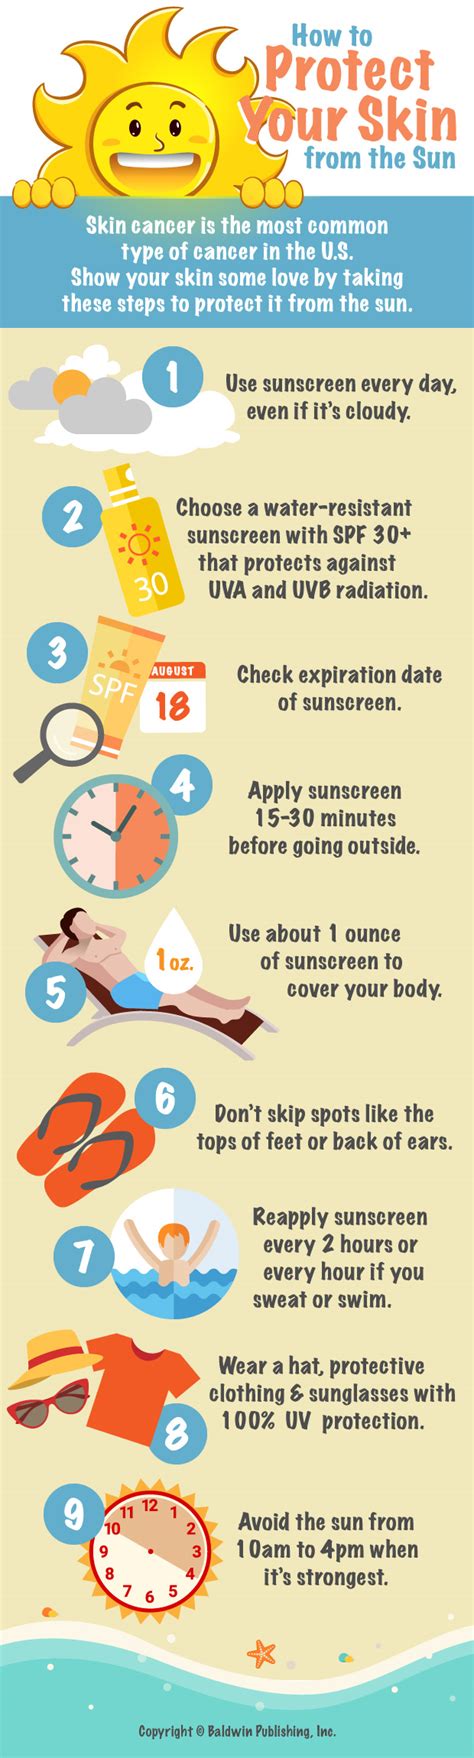 How To Protect Your Skin From The Sun Gundersen Health System